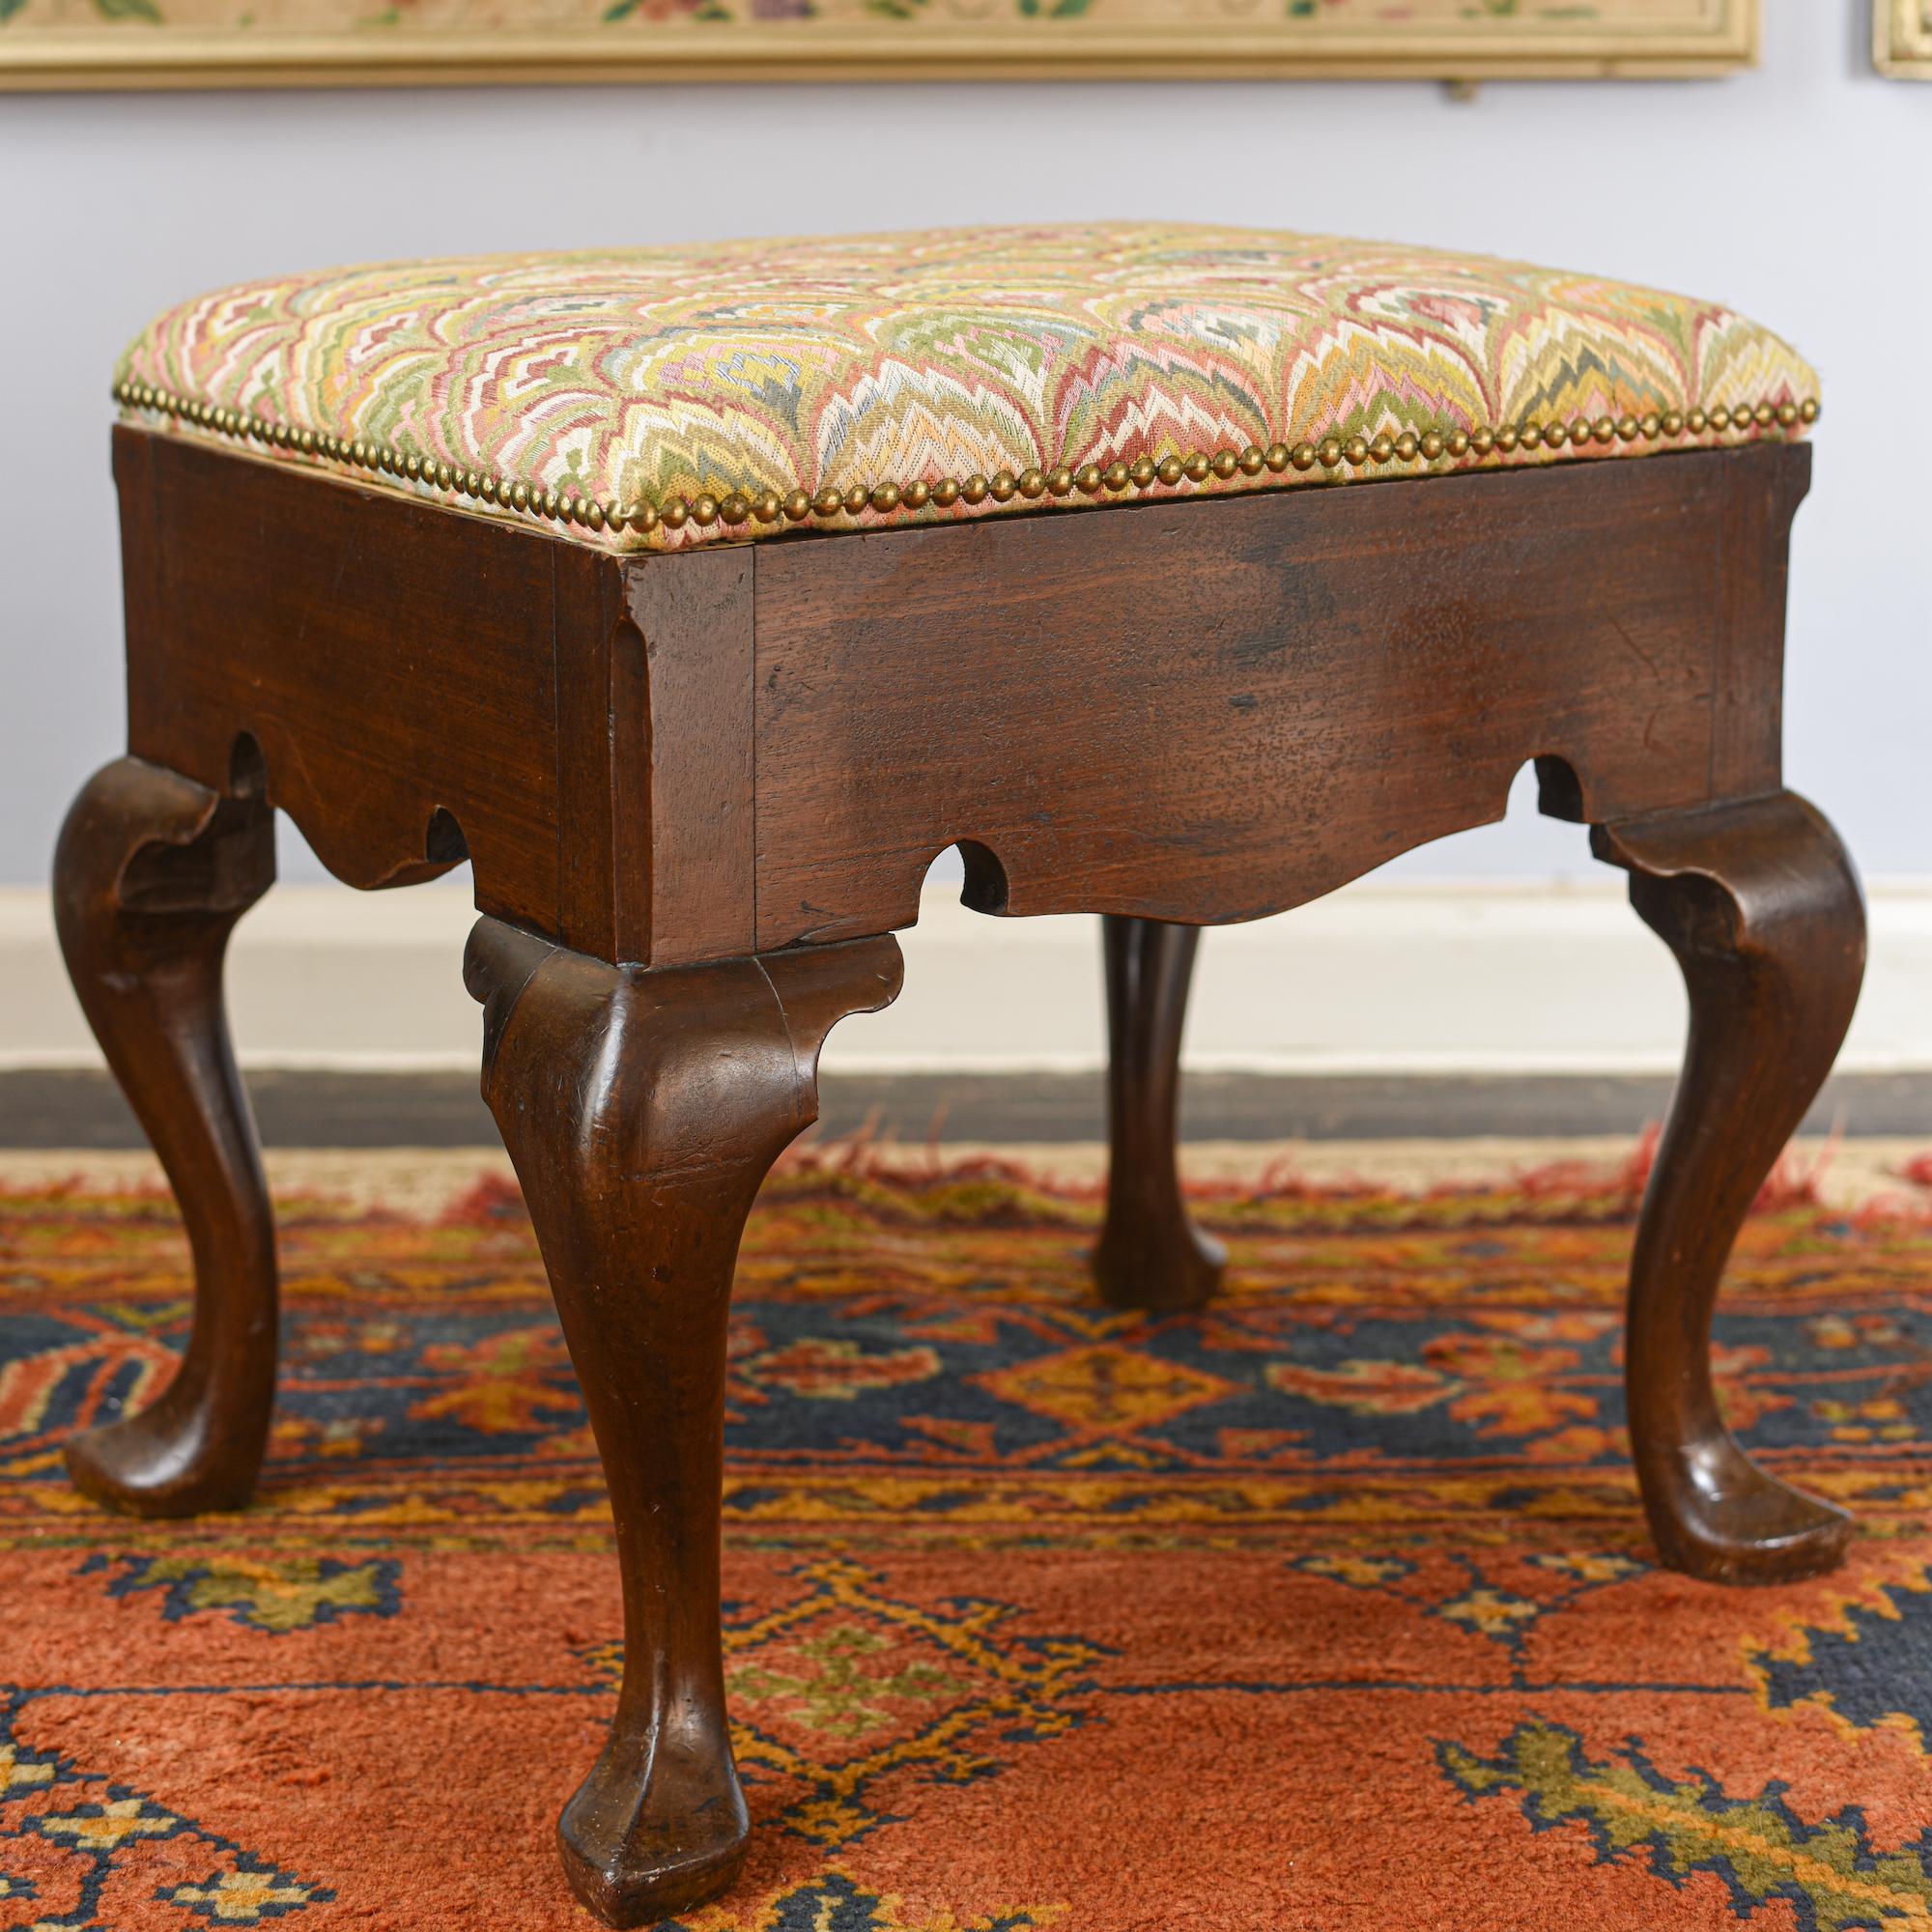 A good quality George II-period Virginia (or 'red') walnut stool with a shaped apron.
Mid-18th century, circa 1750.
Excellent overall color and patination.

The rising top close-nailed in ‘pointe de Hongrie’ type fabric, and revealing a recess.
The